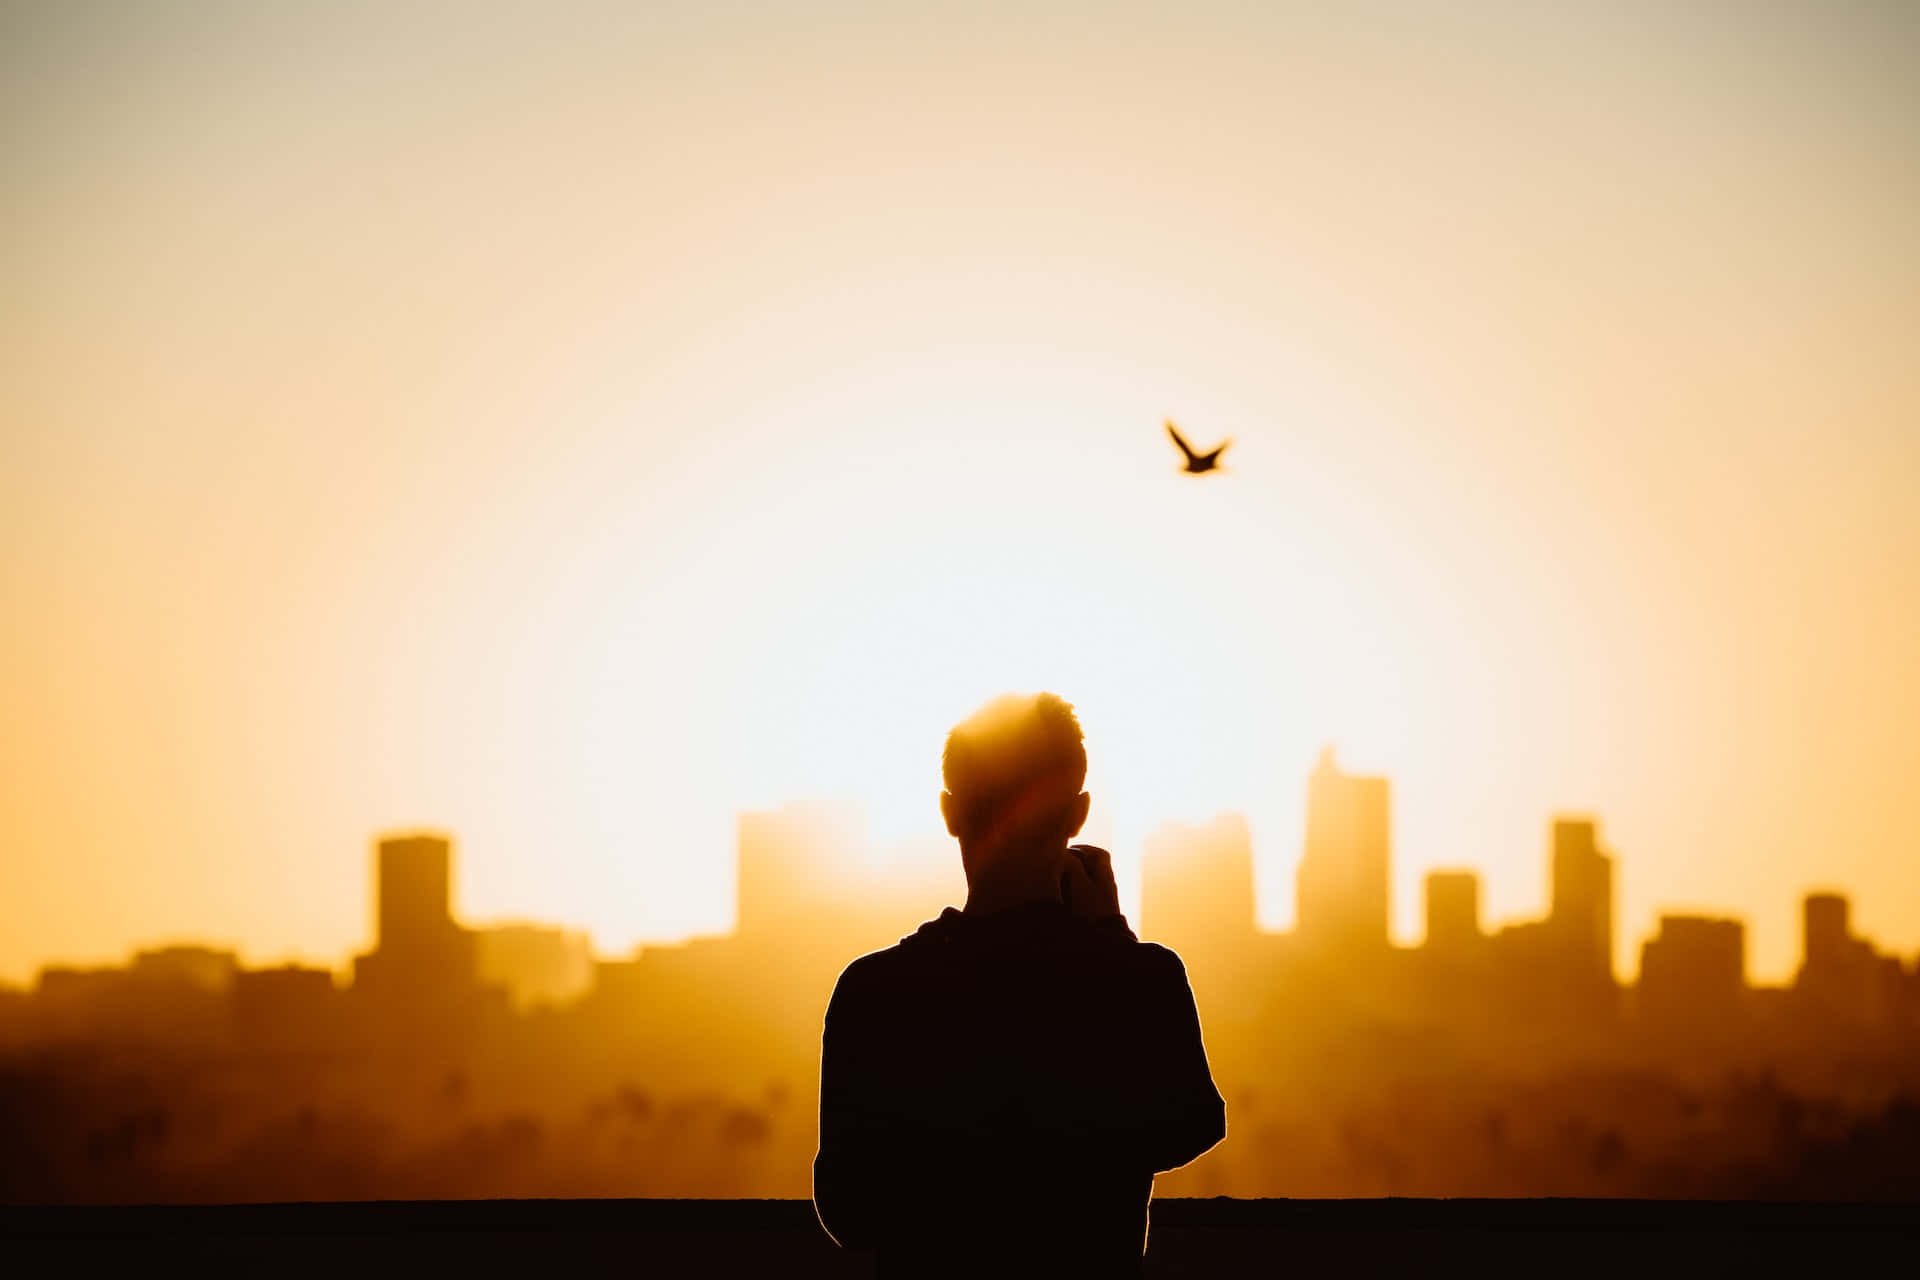 Silhouette Of A Man Watching A Bird Fly Over The City Wallpaper